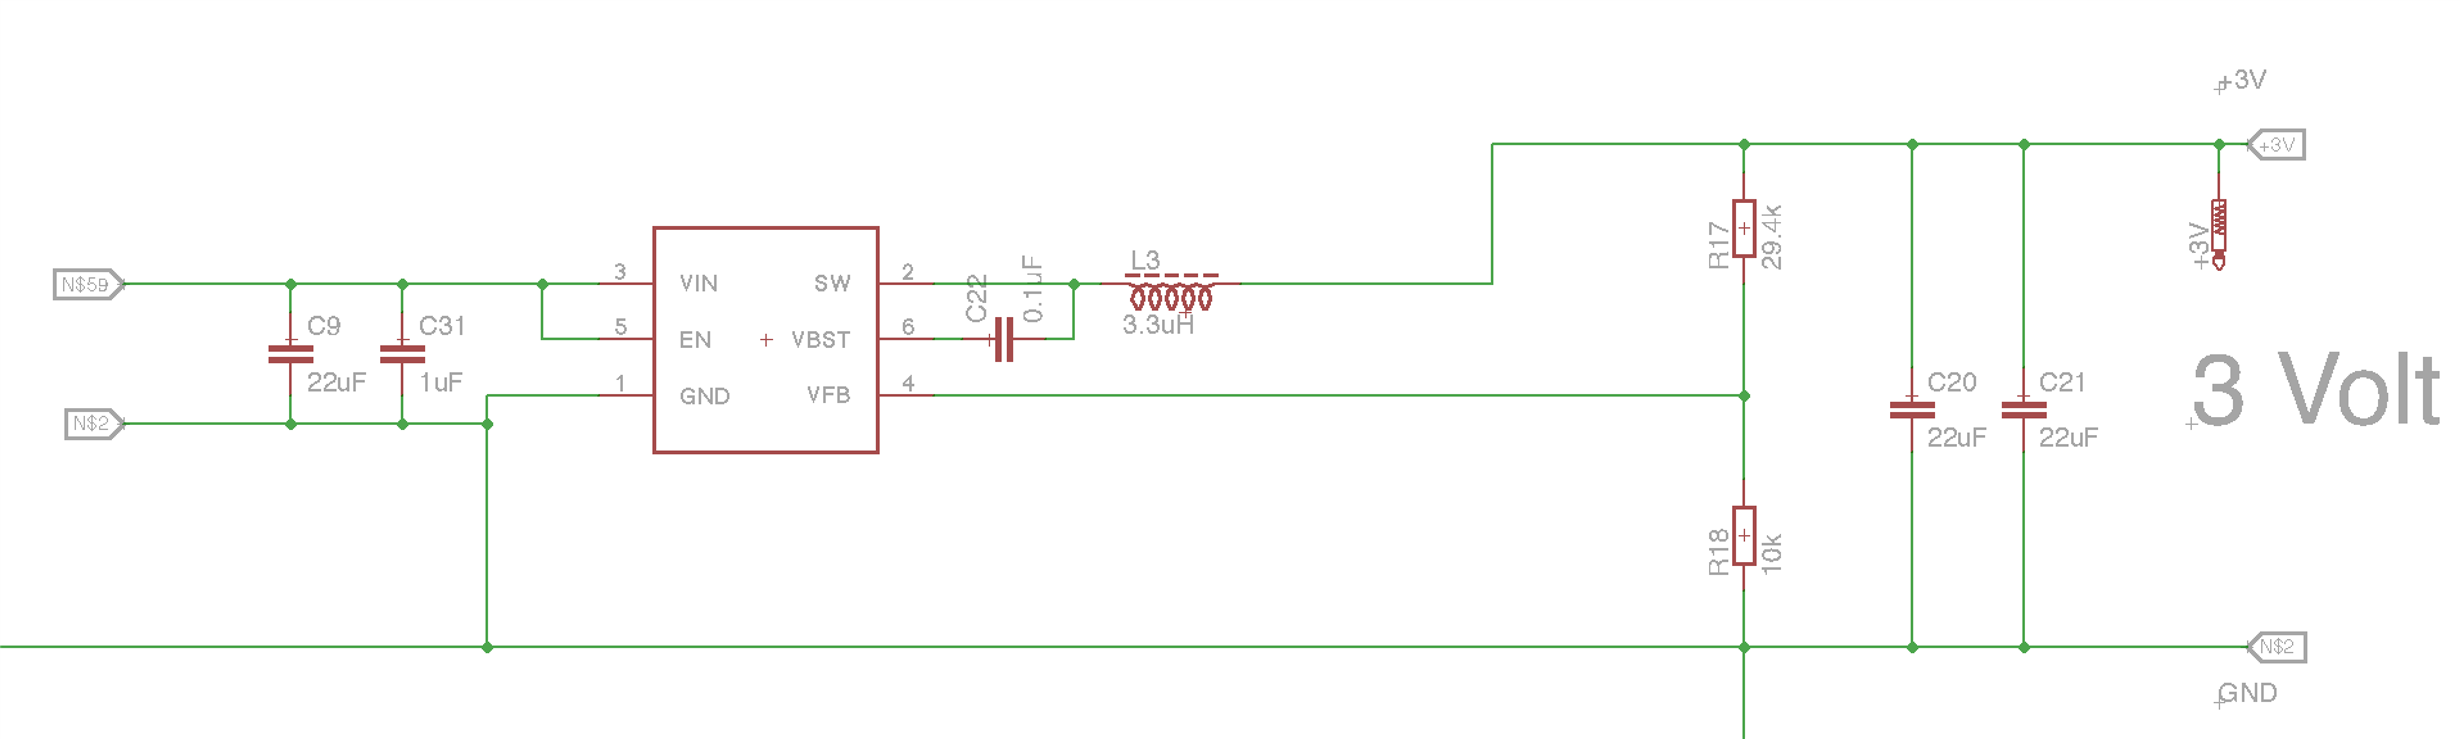 no voltage at output of TPS562201 - Power management forum 